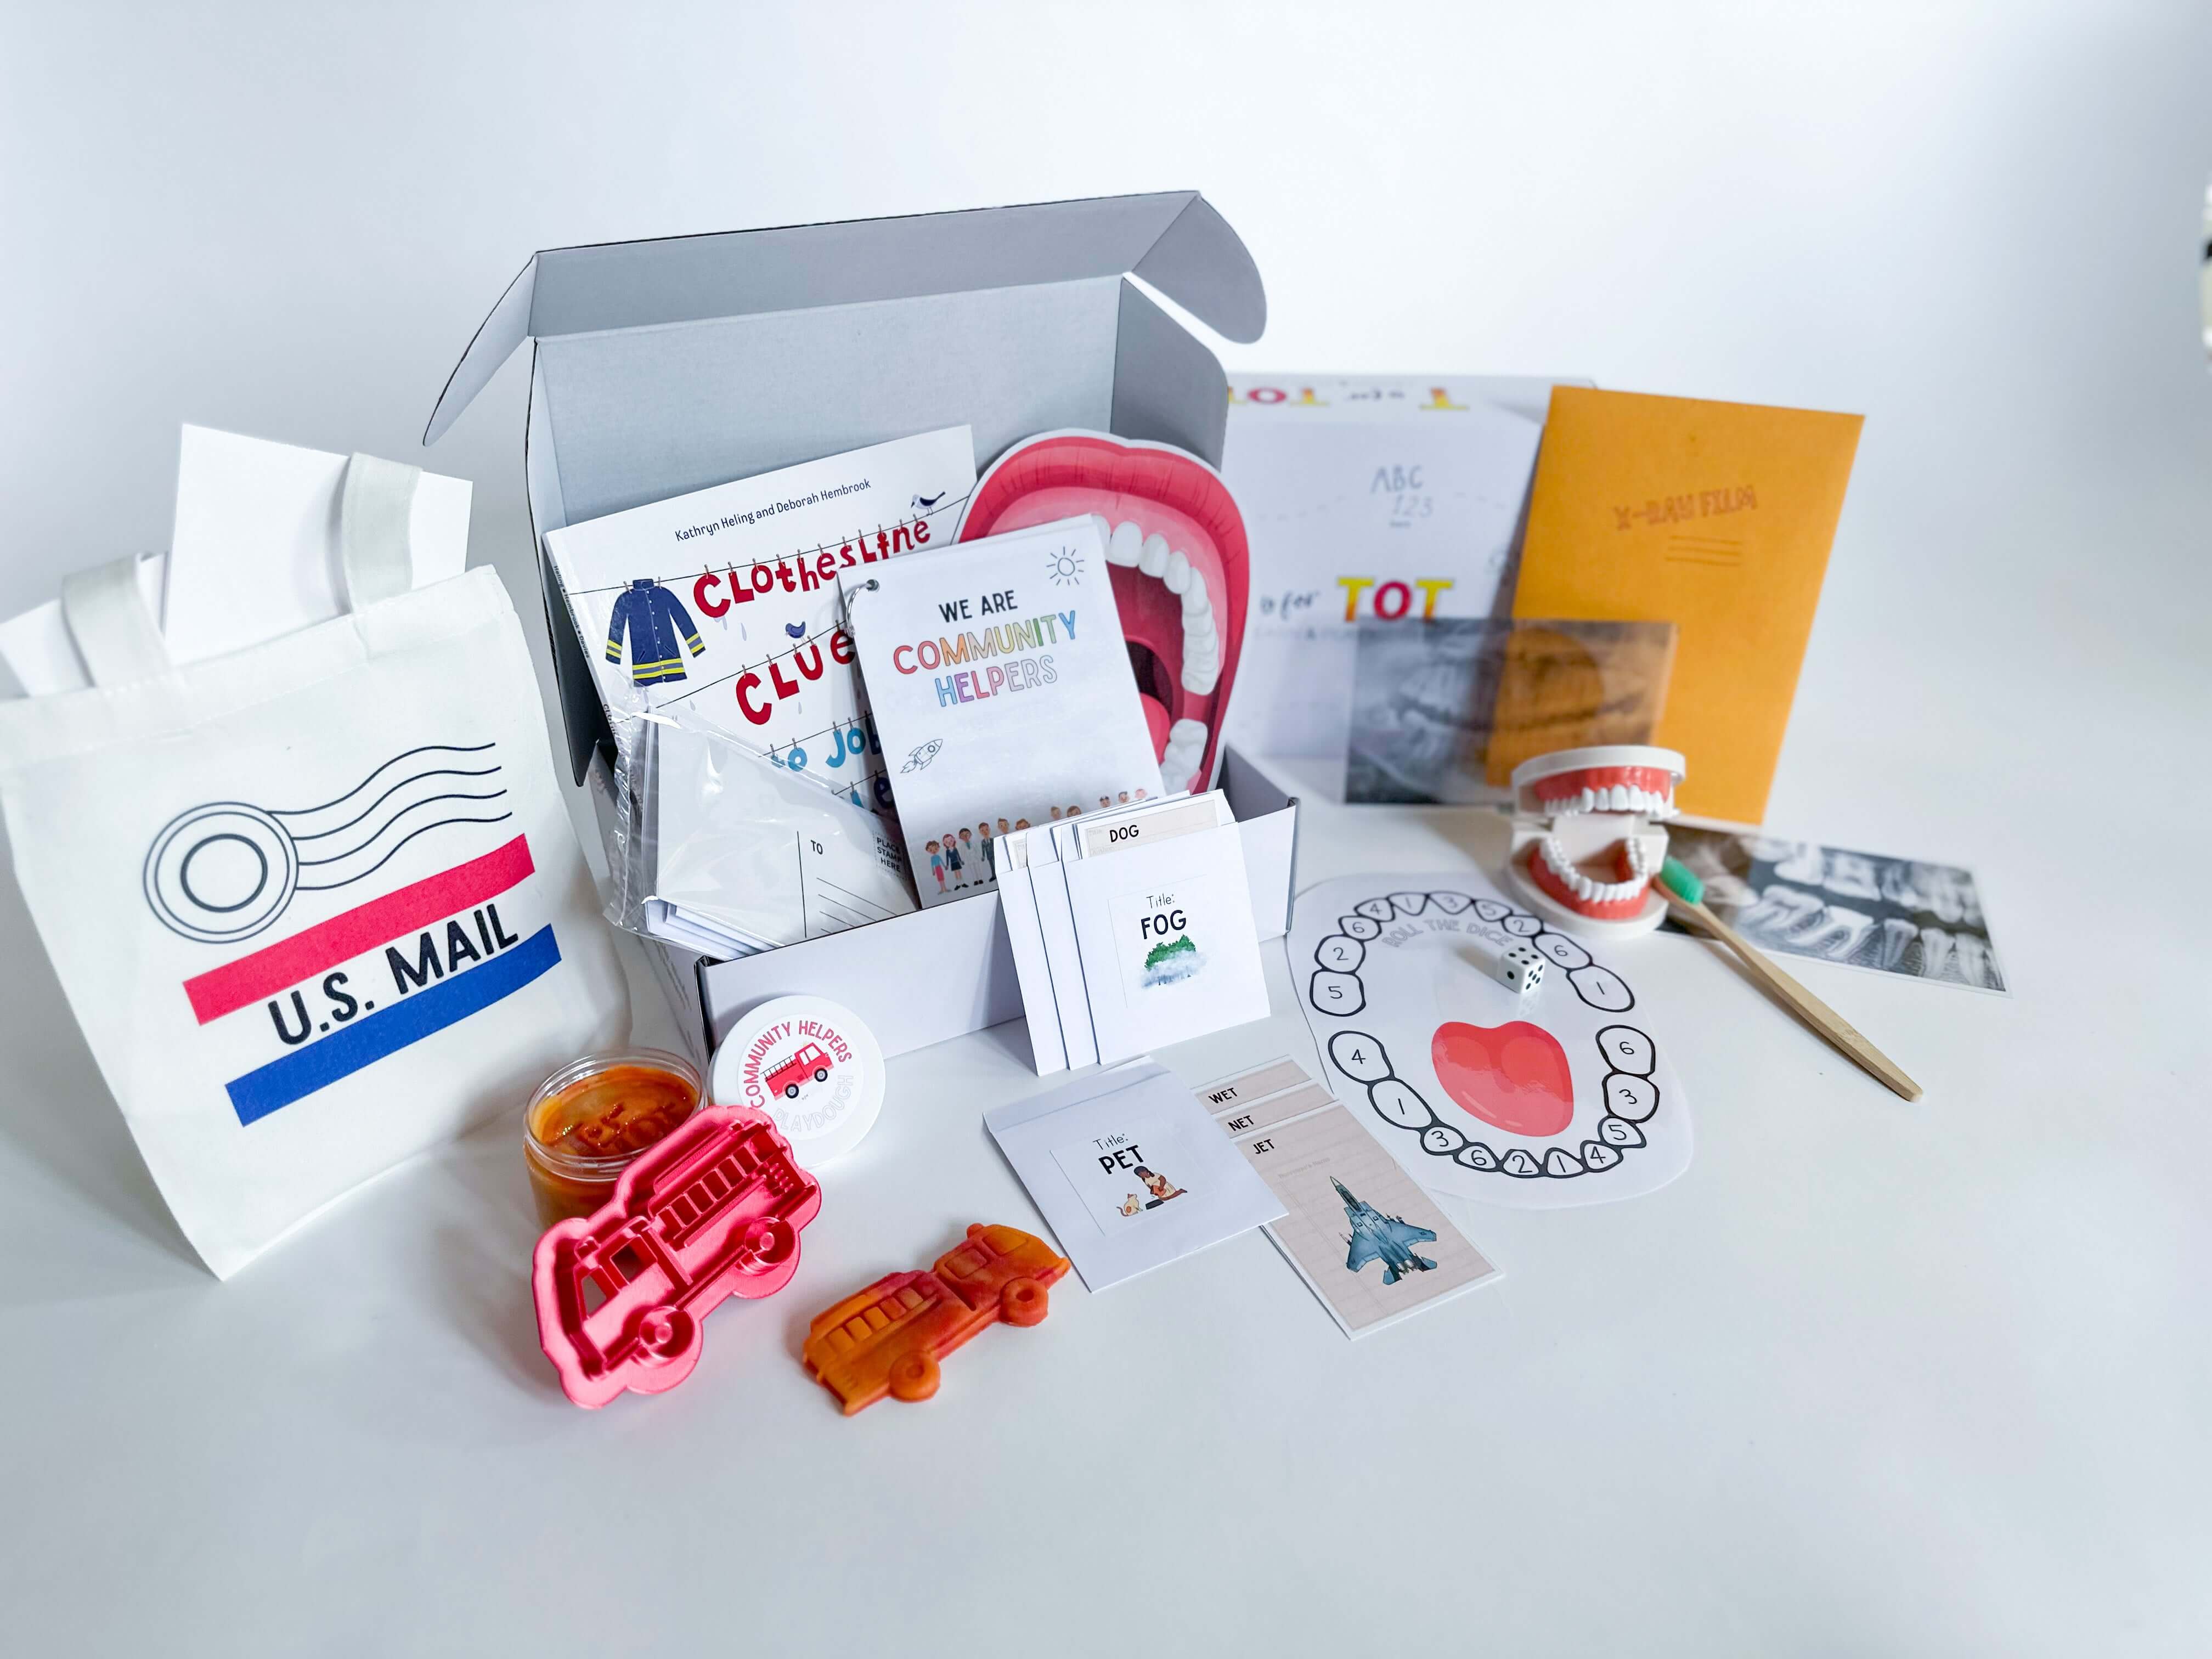 Learn about Community Helpers with this play kit for kids aged 3-6. Includes fire engine playdough cutter, homemade playdough, dental x-rays, Clothesline Clues book, library card rhyming game, and mailbag with letters for role-playing.